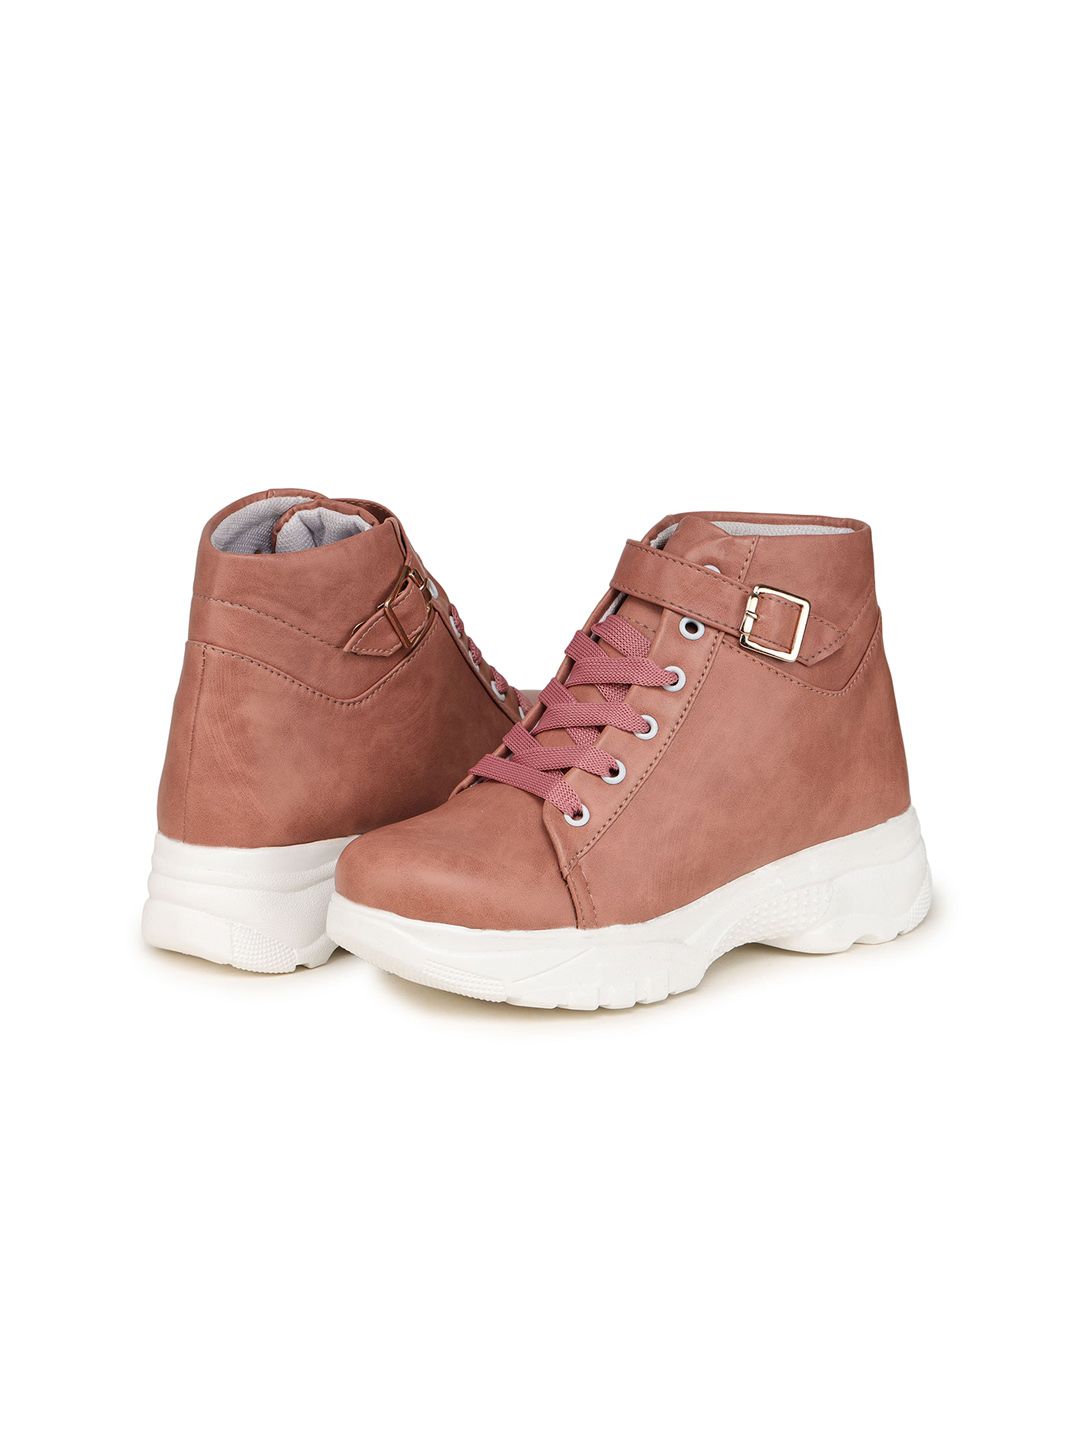 BOOTCO Women Mid-Top Lightweight Sneakers Price in India